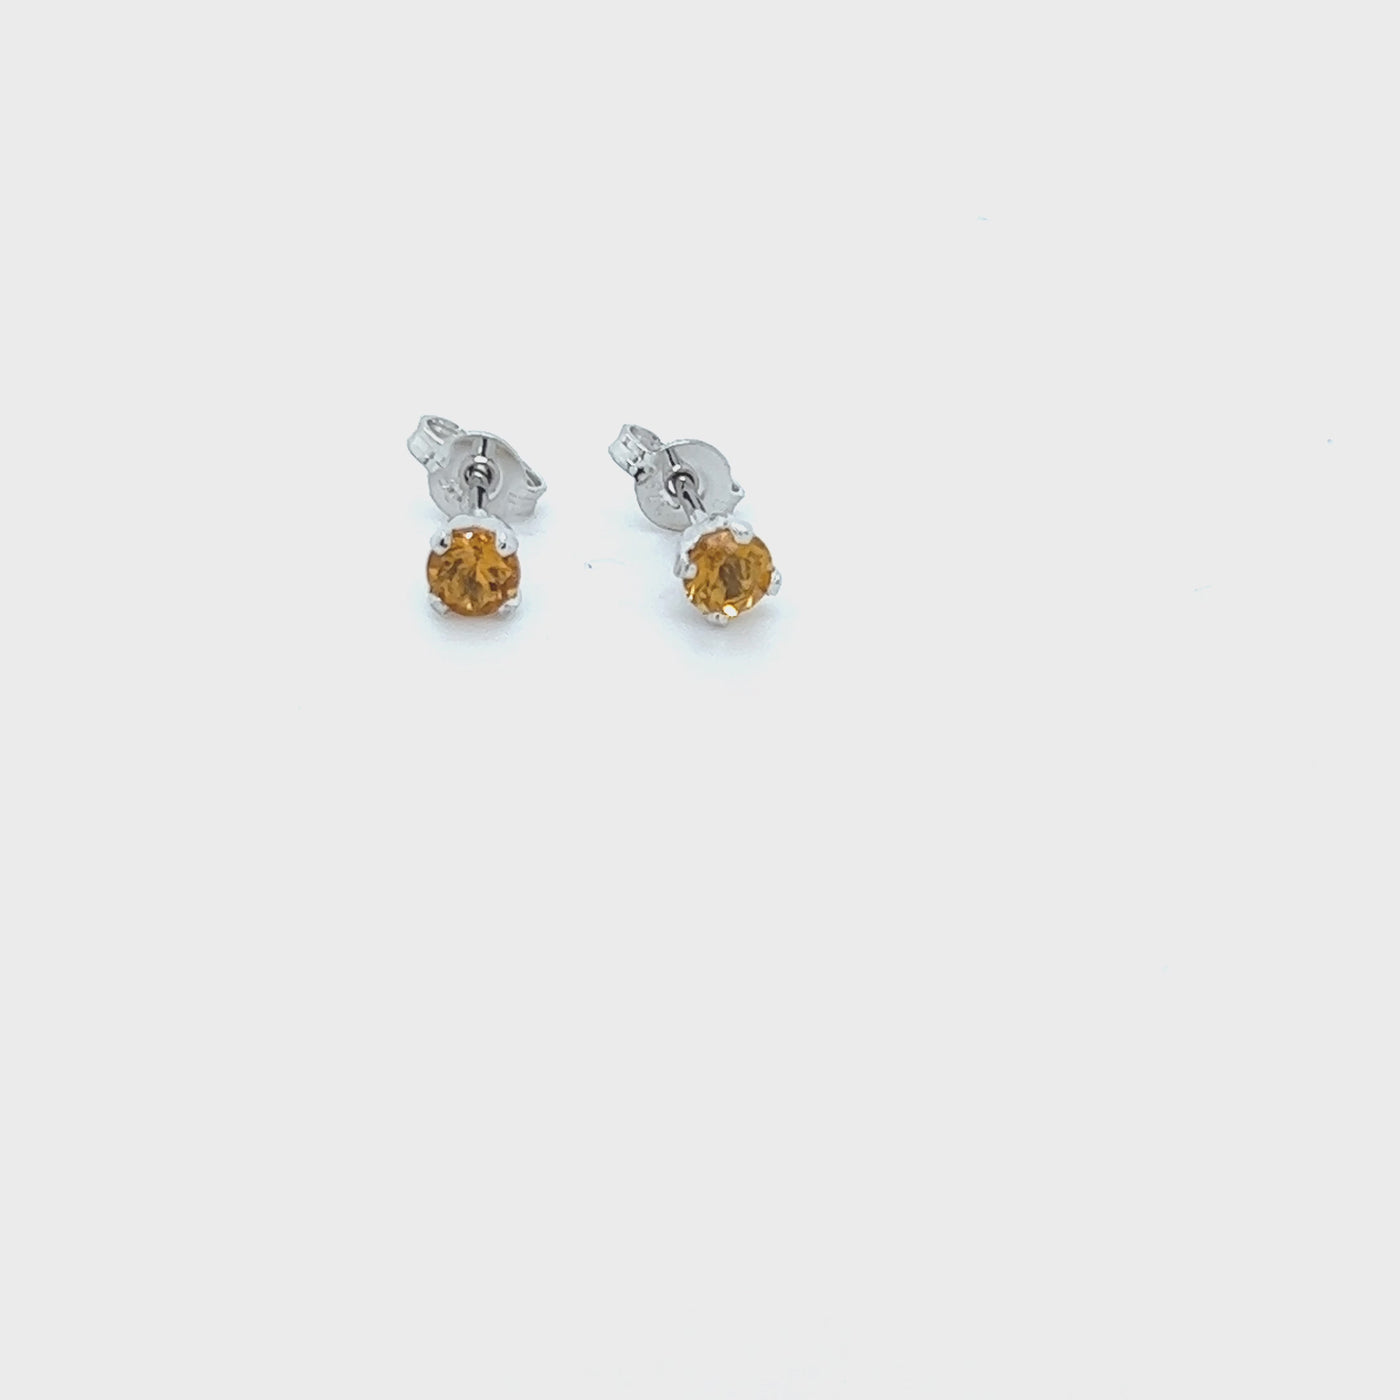 9ct White Gold Citrine Solitaire Stud Earrings.